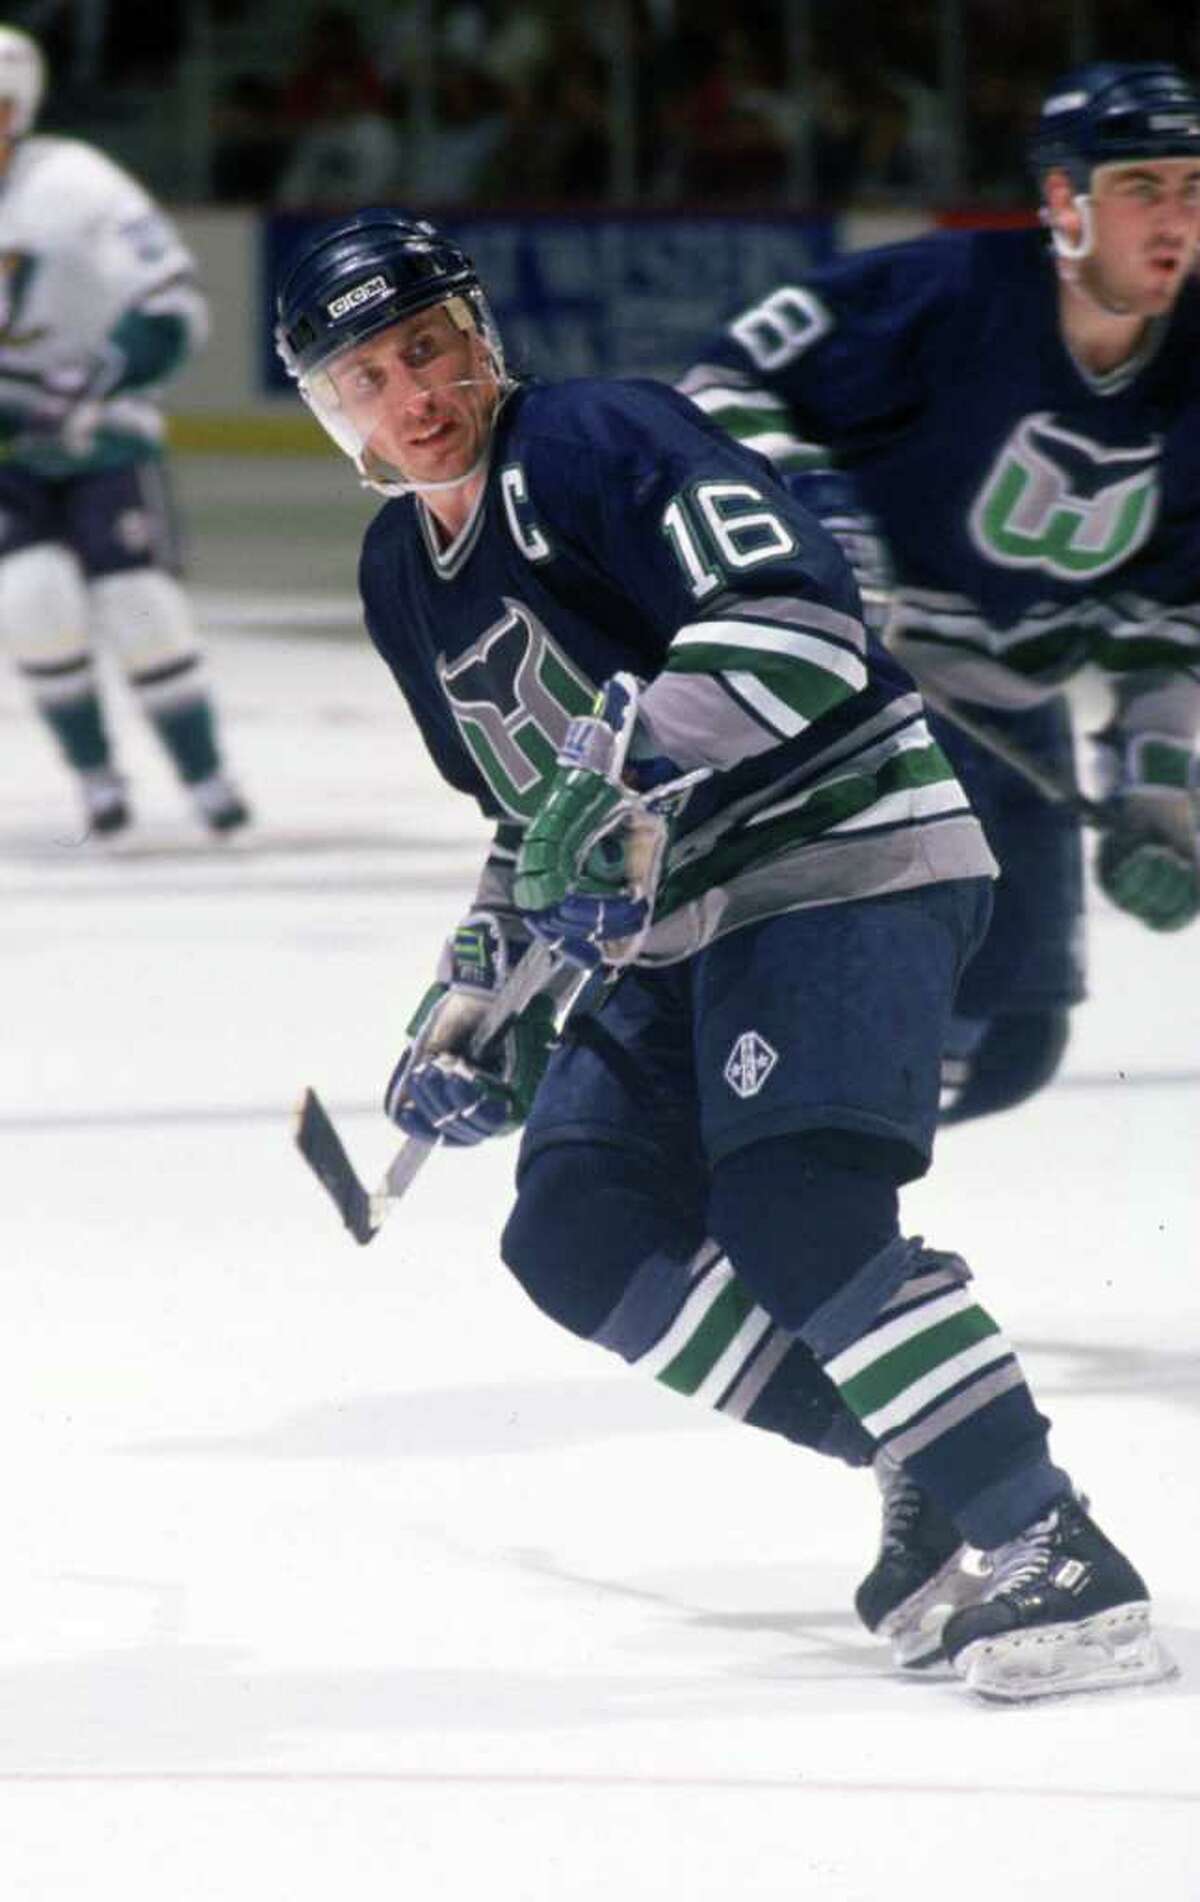 They're 25 years gone, but CT still loves our Hartford Whalers